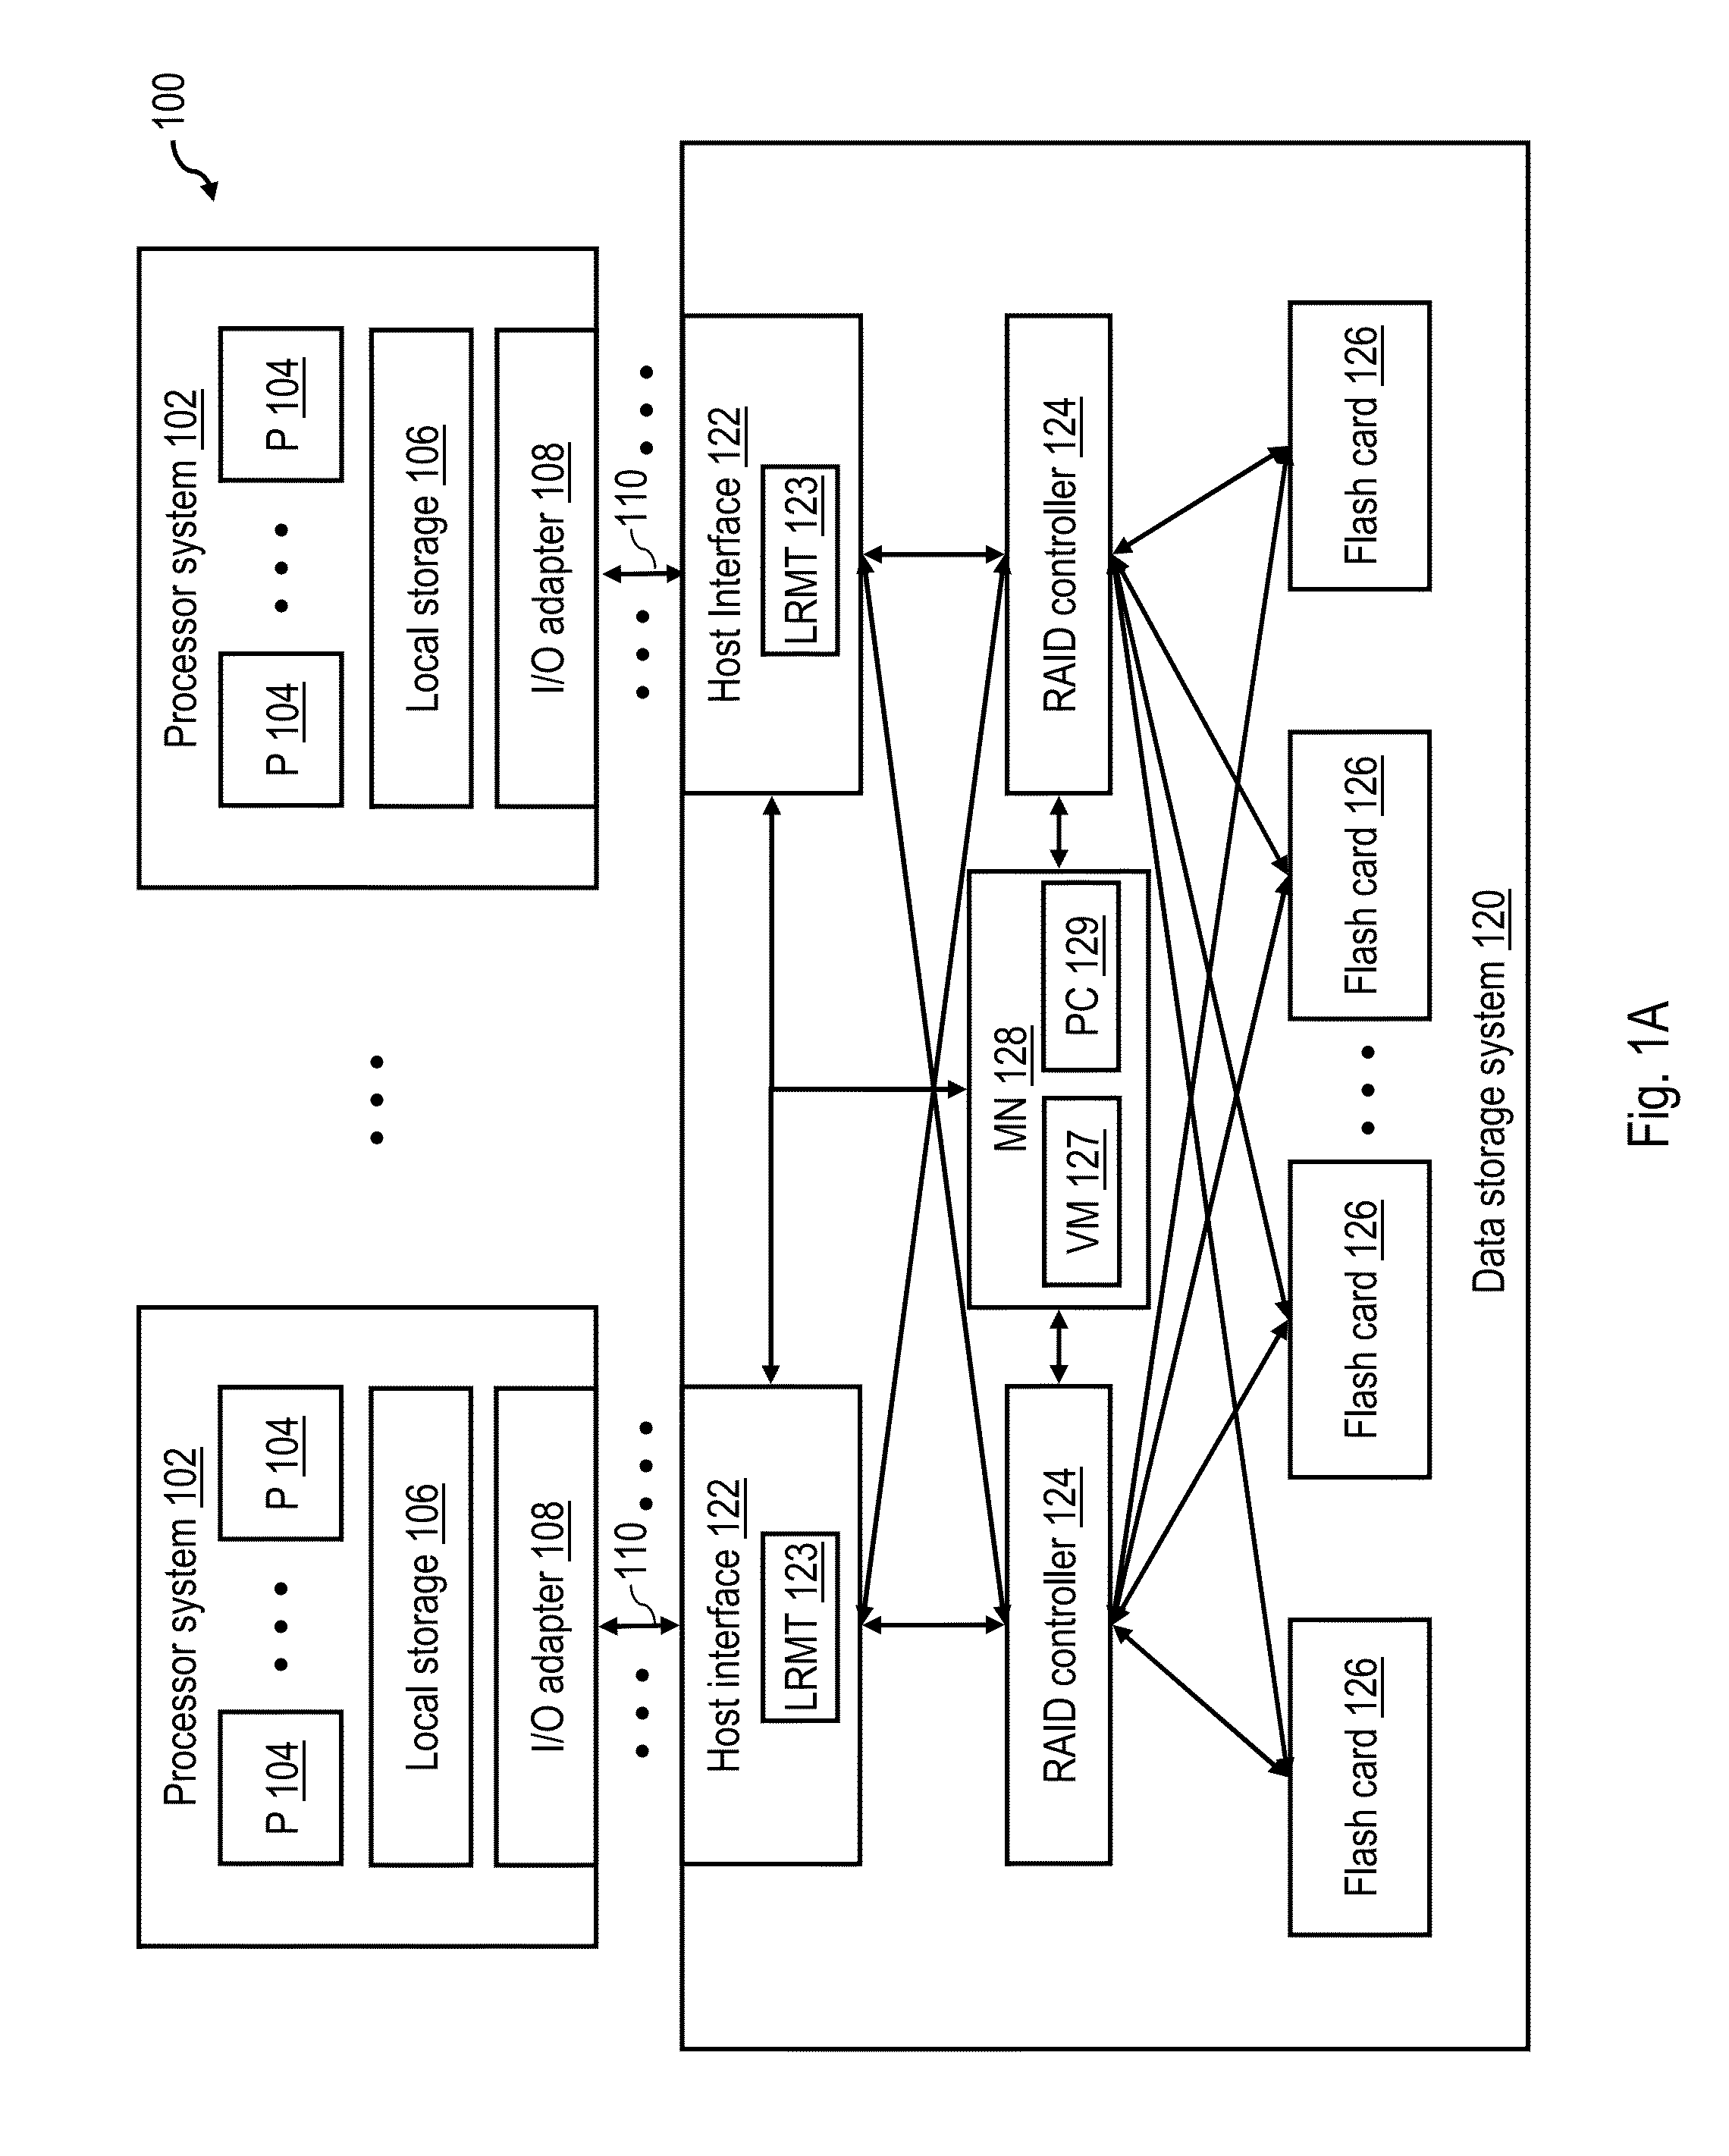 Optimizing thin provisioning in a data storage system through selective use of multiple grain sizes